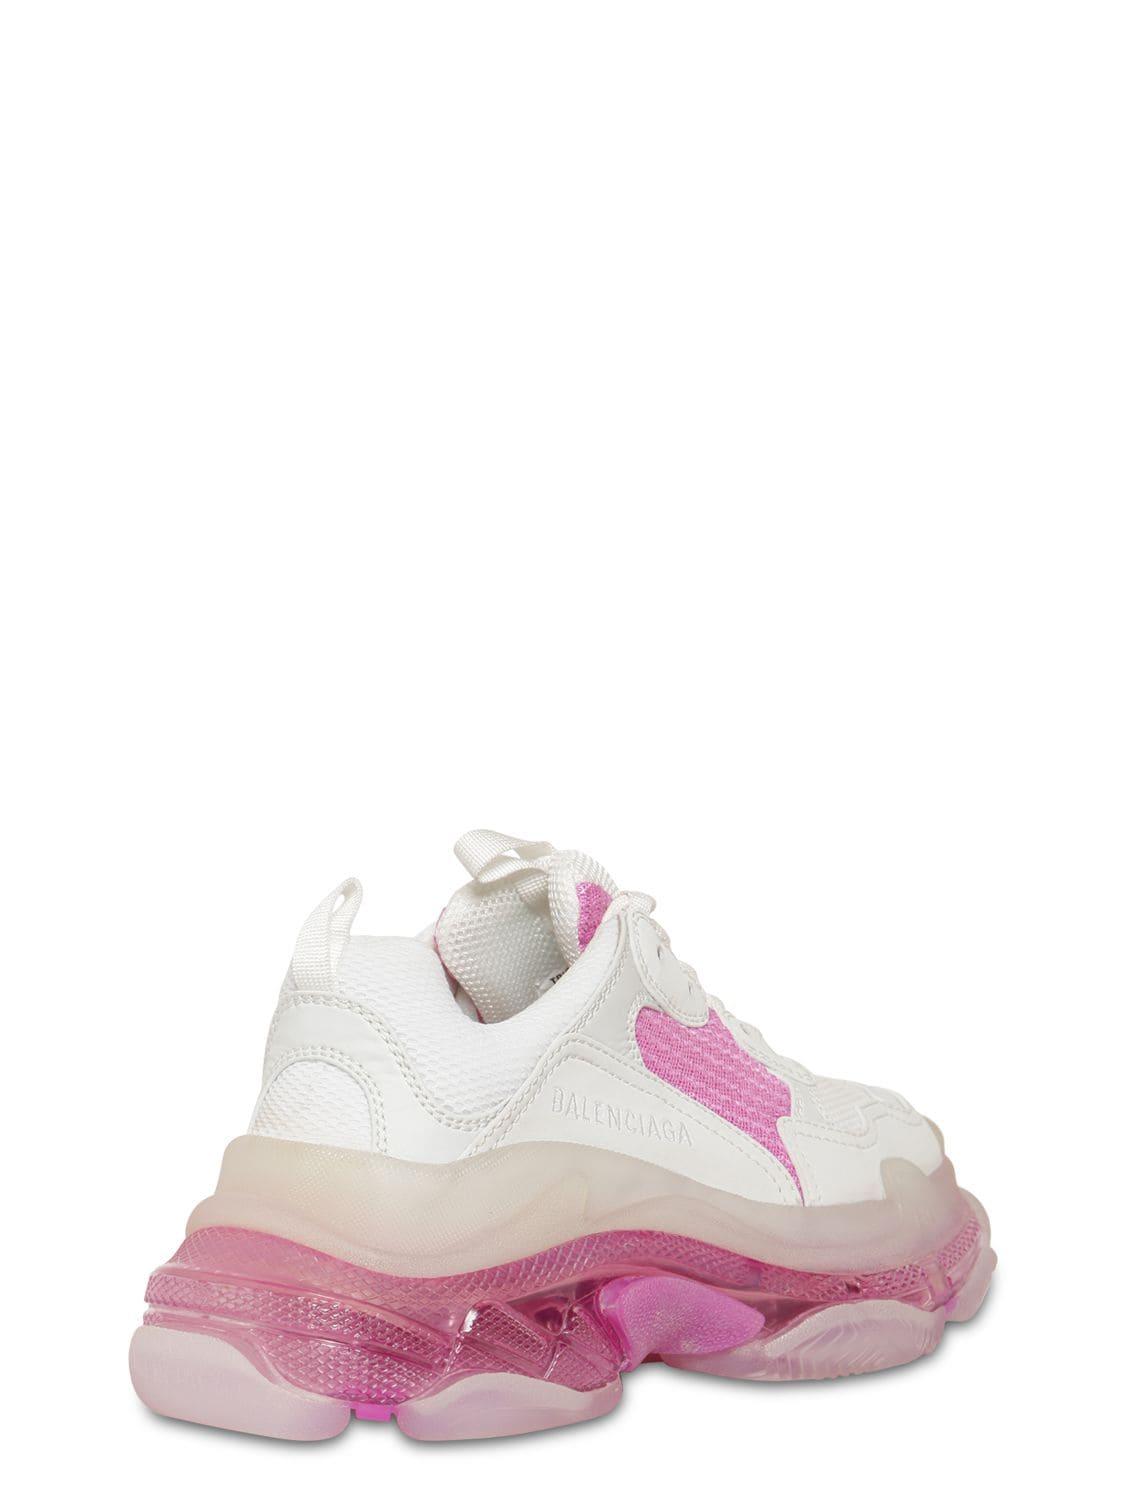 Balenciaga Leather Triple S Clear Sole Sneaker in White/Pink (Pink) | Lyst